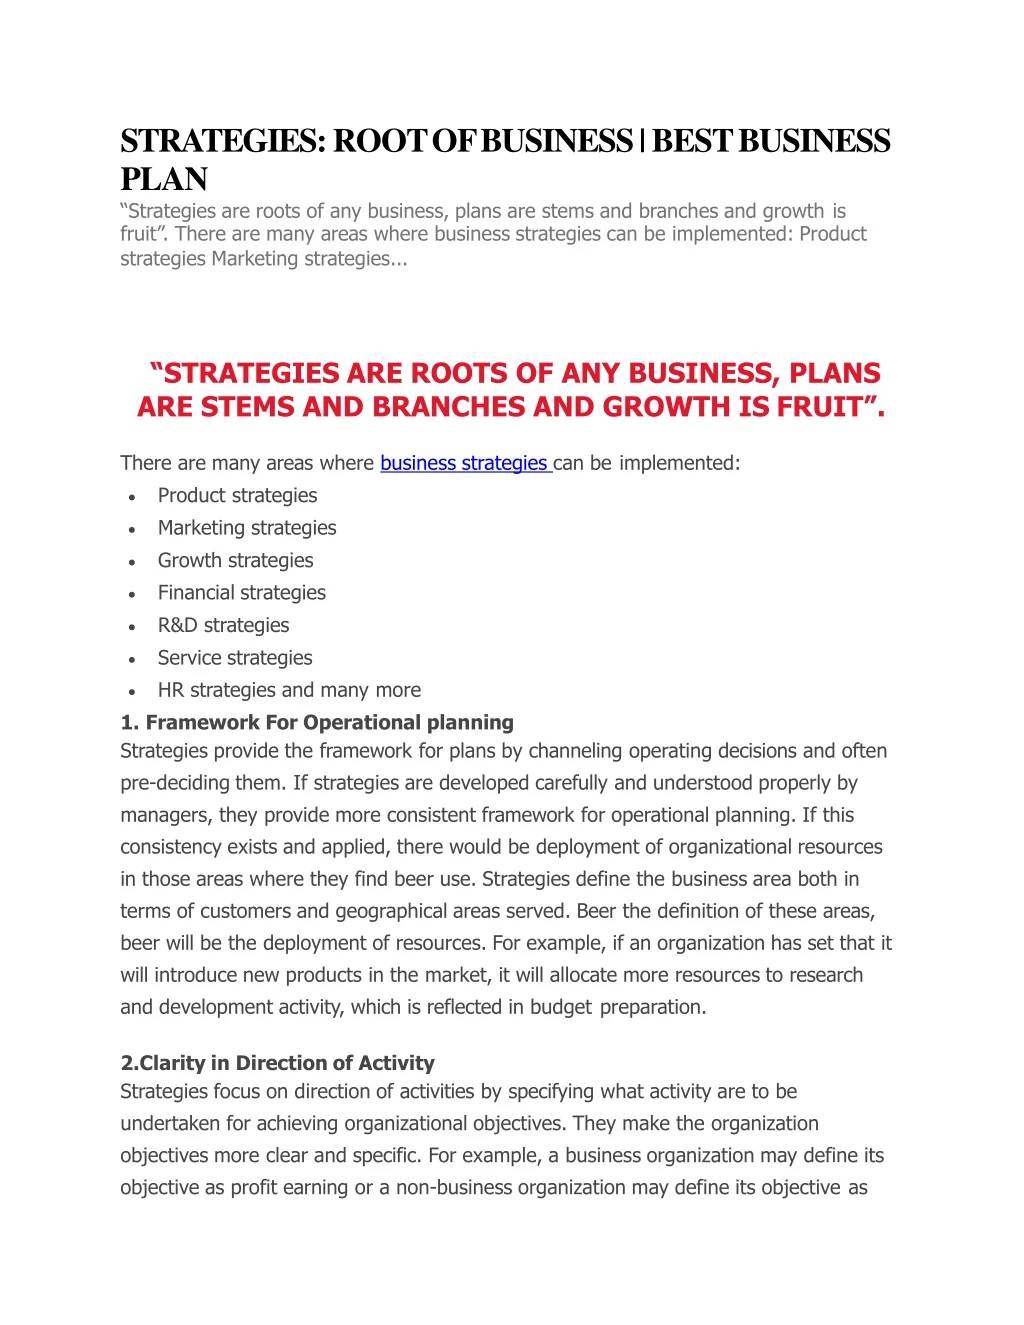 strategies root of business best business plan